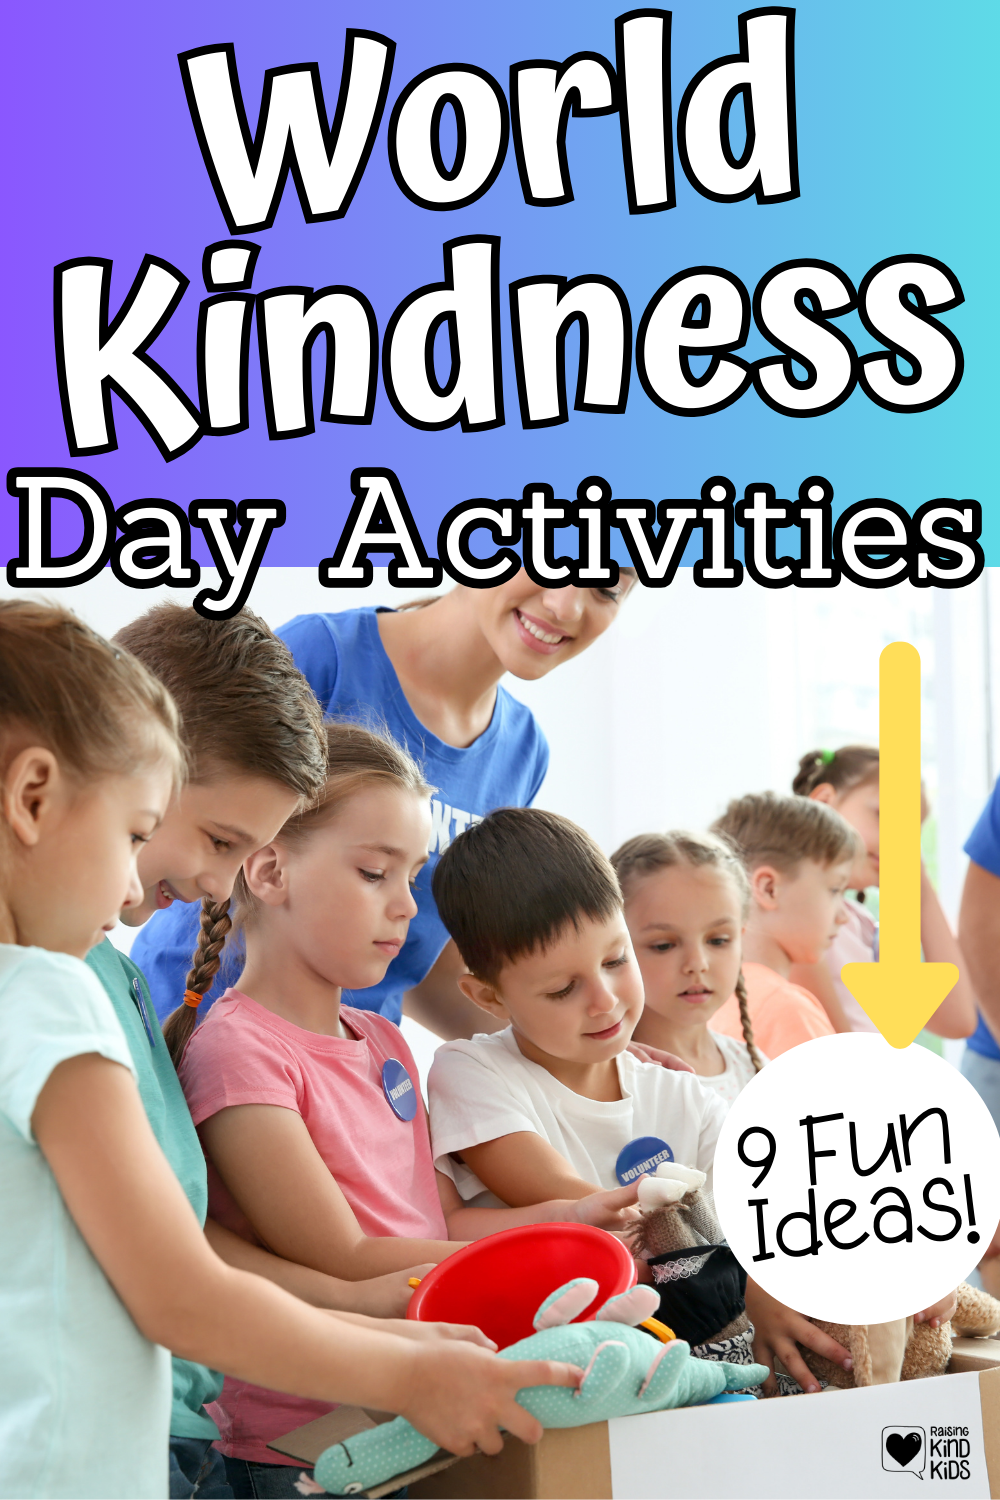 Use these 9 ideas for World Kindness Day Activities for Kids to spread more kindness to your community on November 13th each year. 